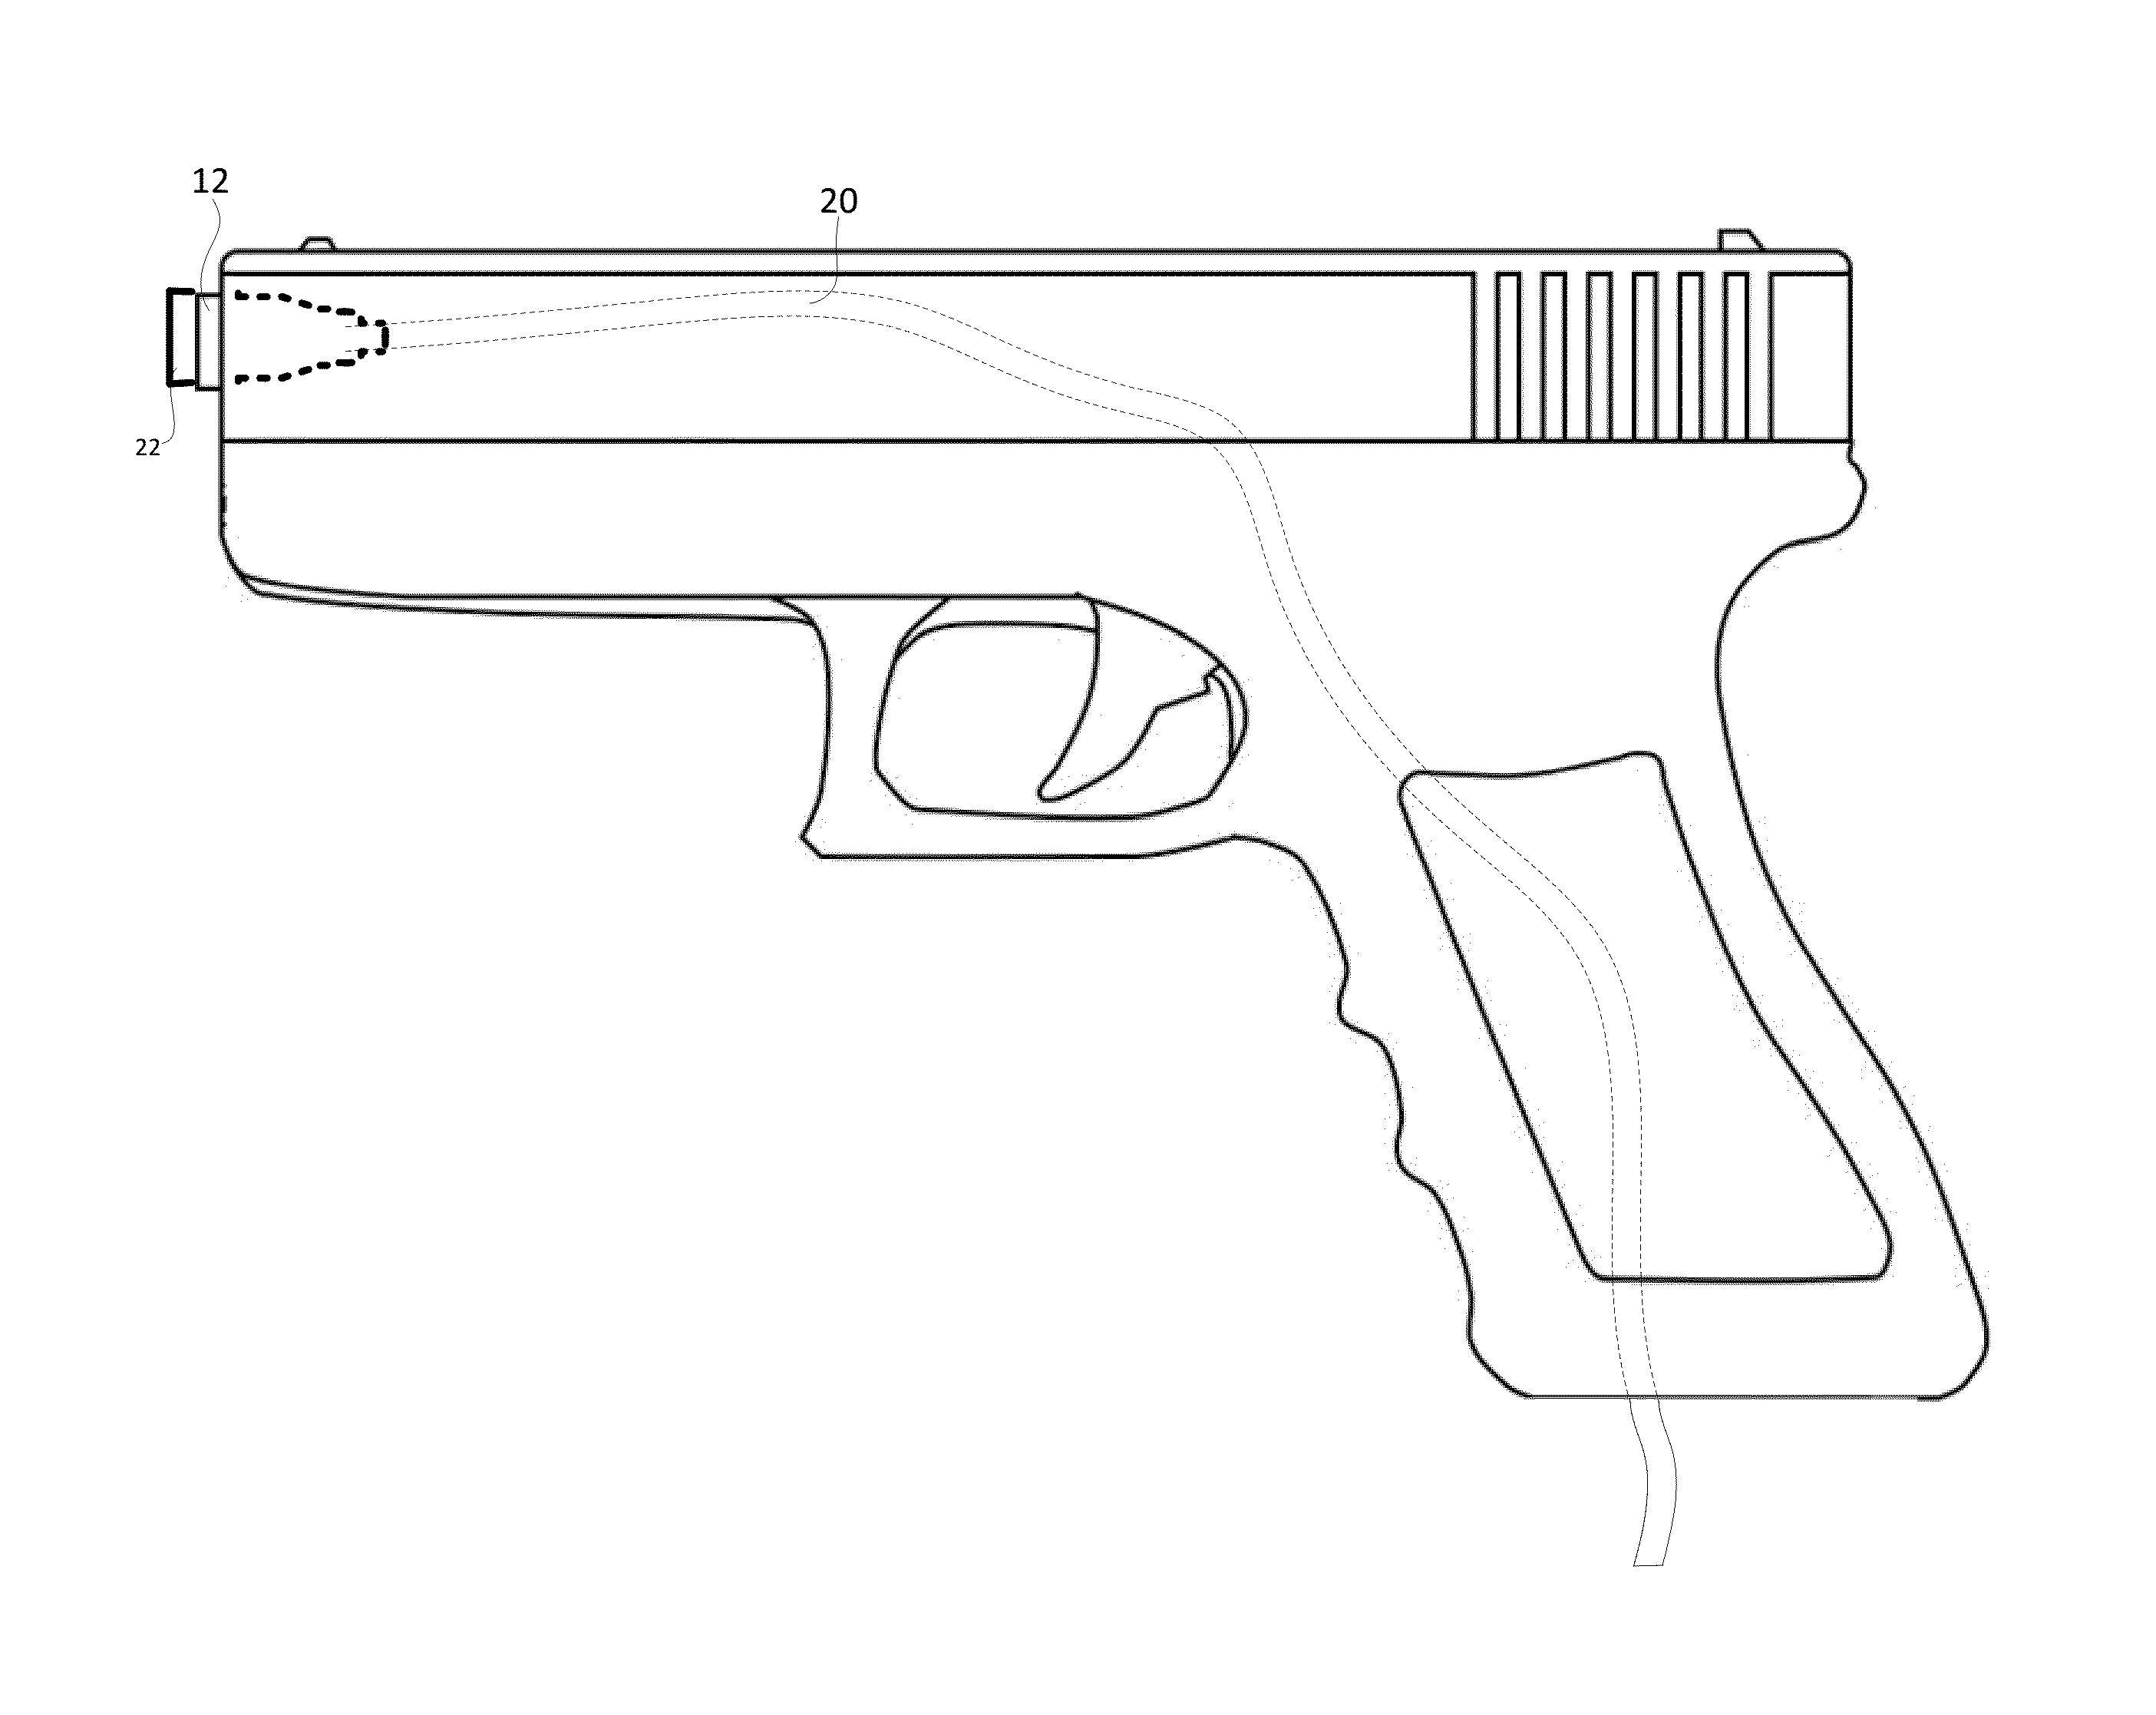 Firearm safety and chamber block indicator